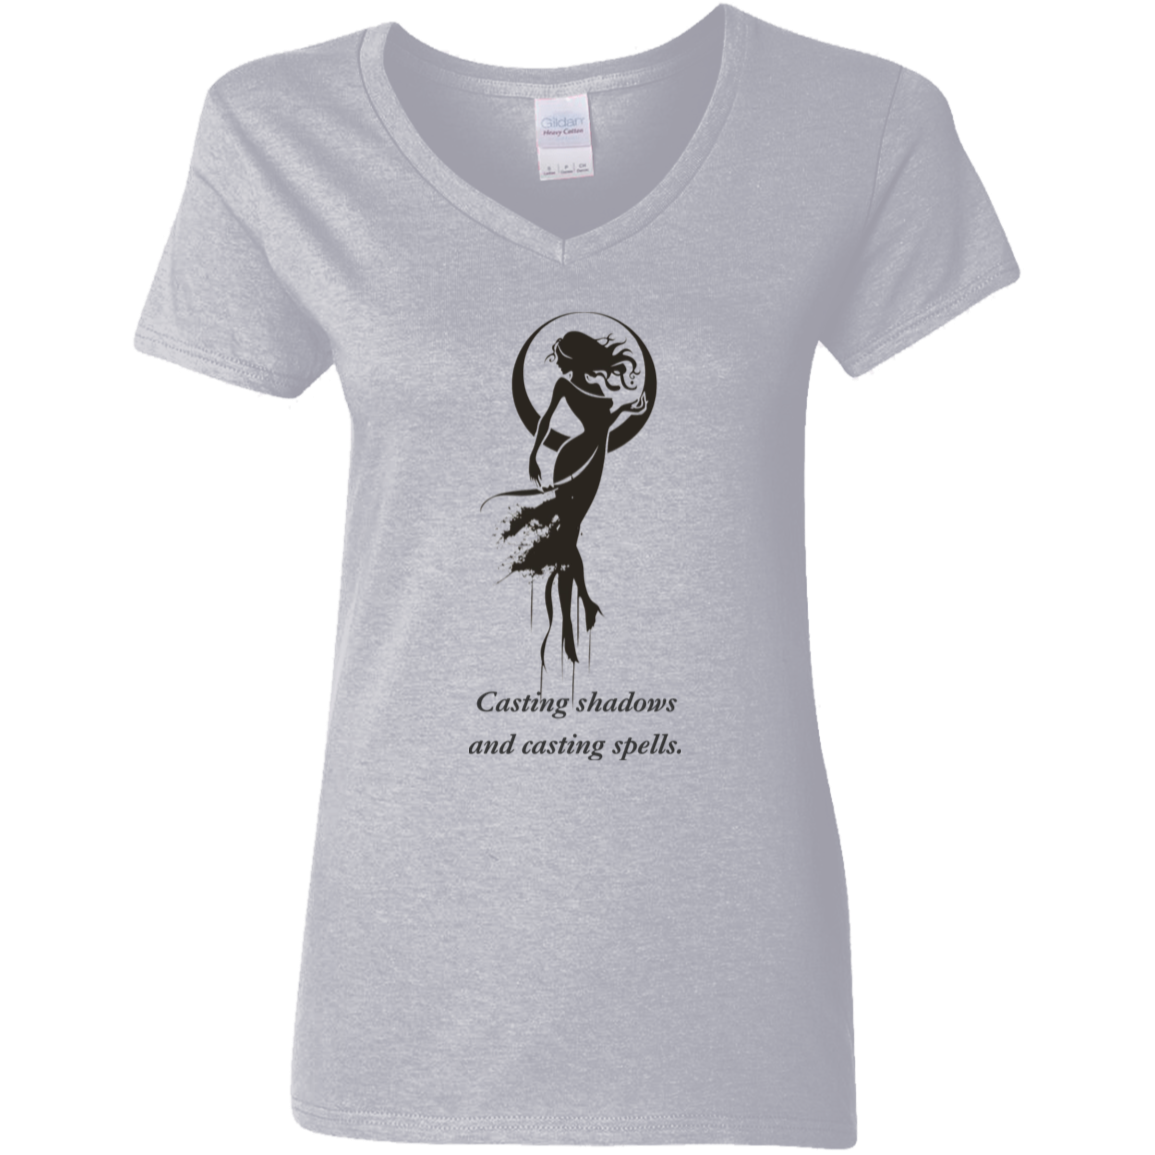 Casting shadows and casting spells gray graphic T shirt. from BLK Moon Shop